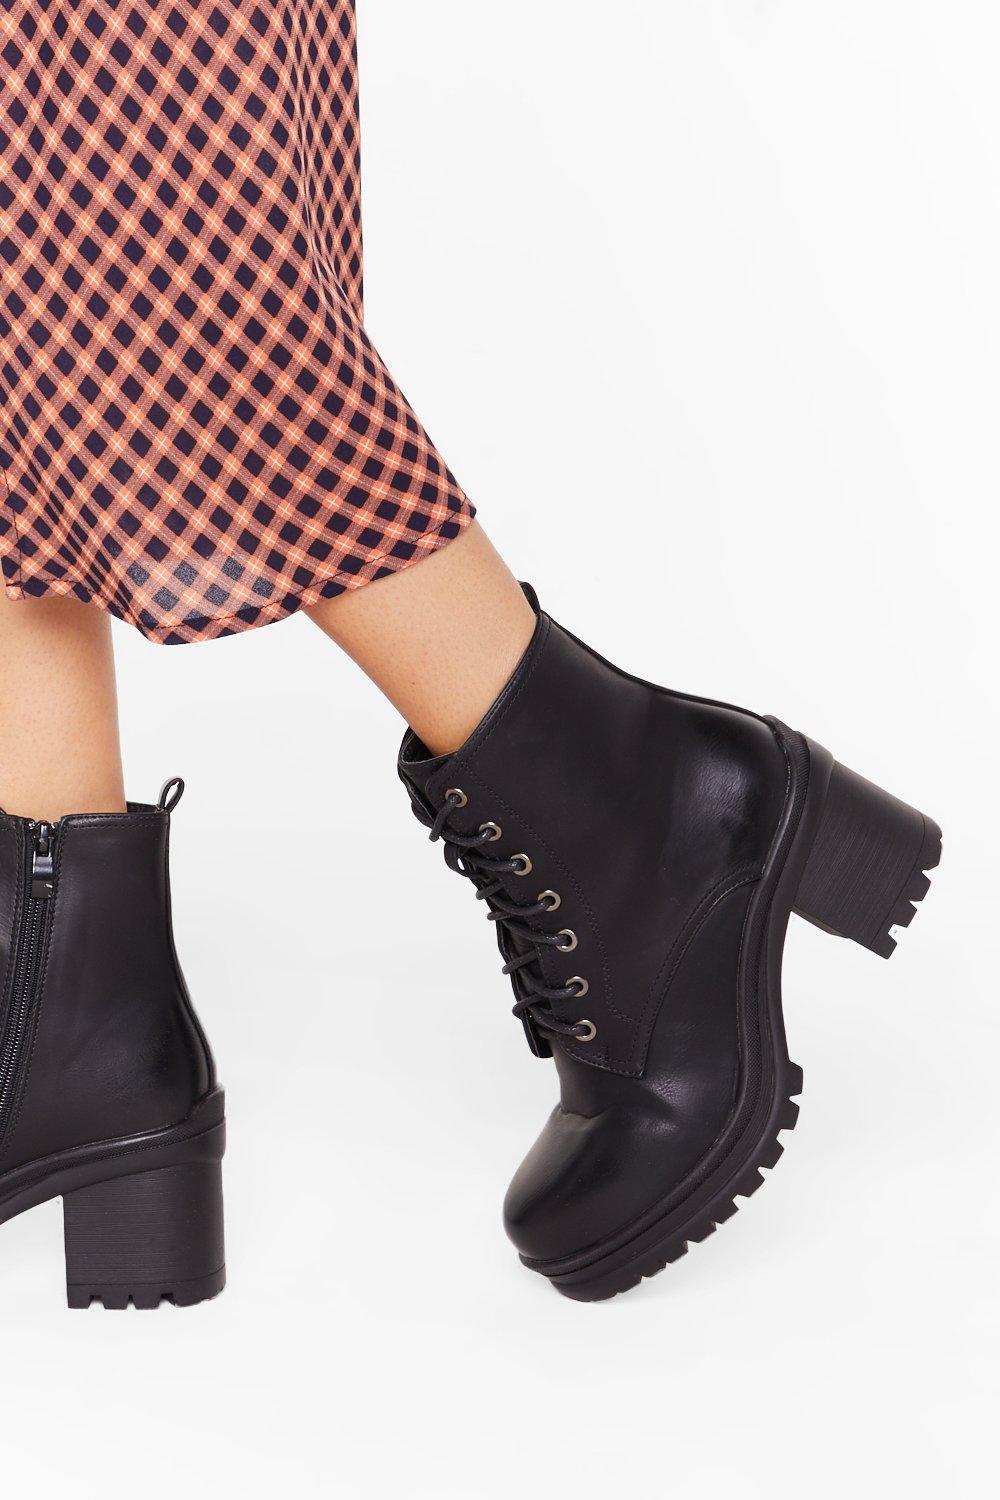 black lace up heeled booties